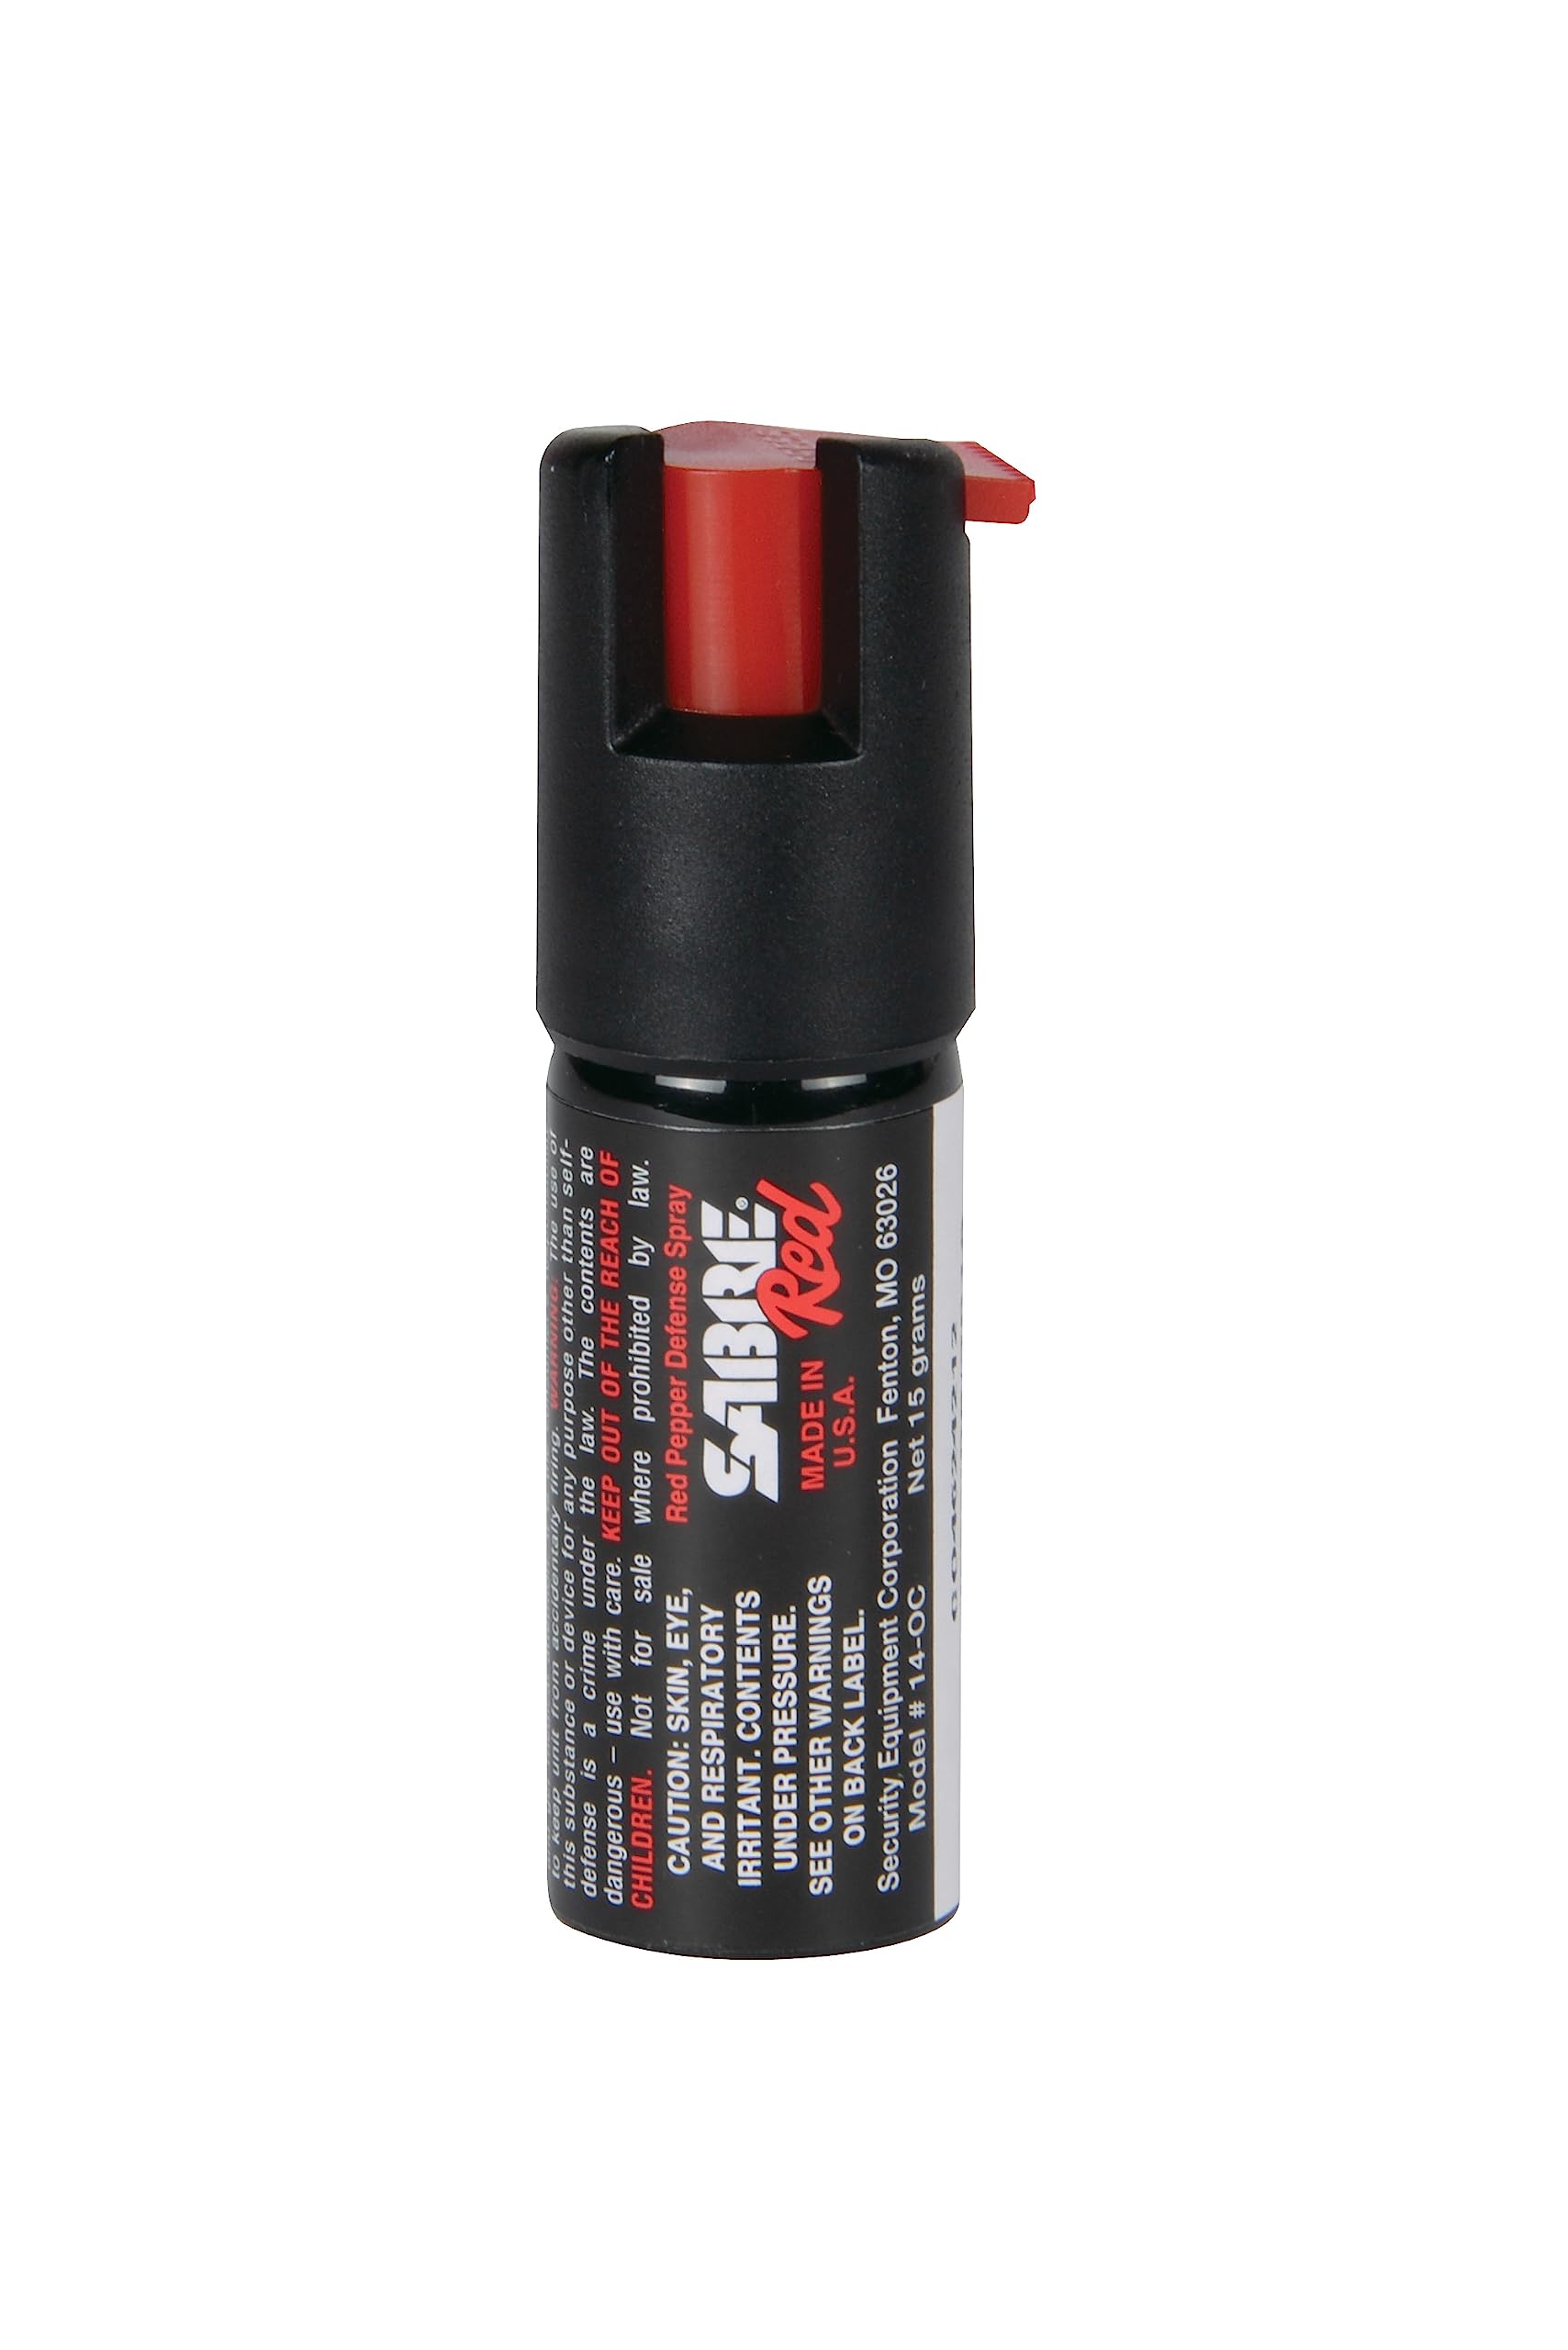 SABRE RED Maximum Strength Pepper Spray Compact Refill Unit, 25 Bursts, 10-Foot (3-Meter) Range, Made in the USA, Black , .54 oz.